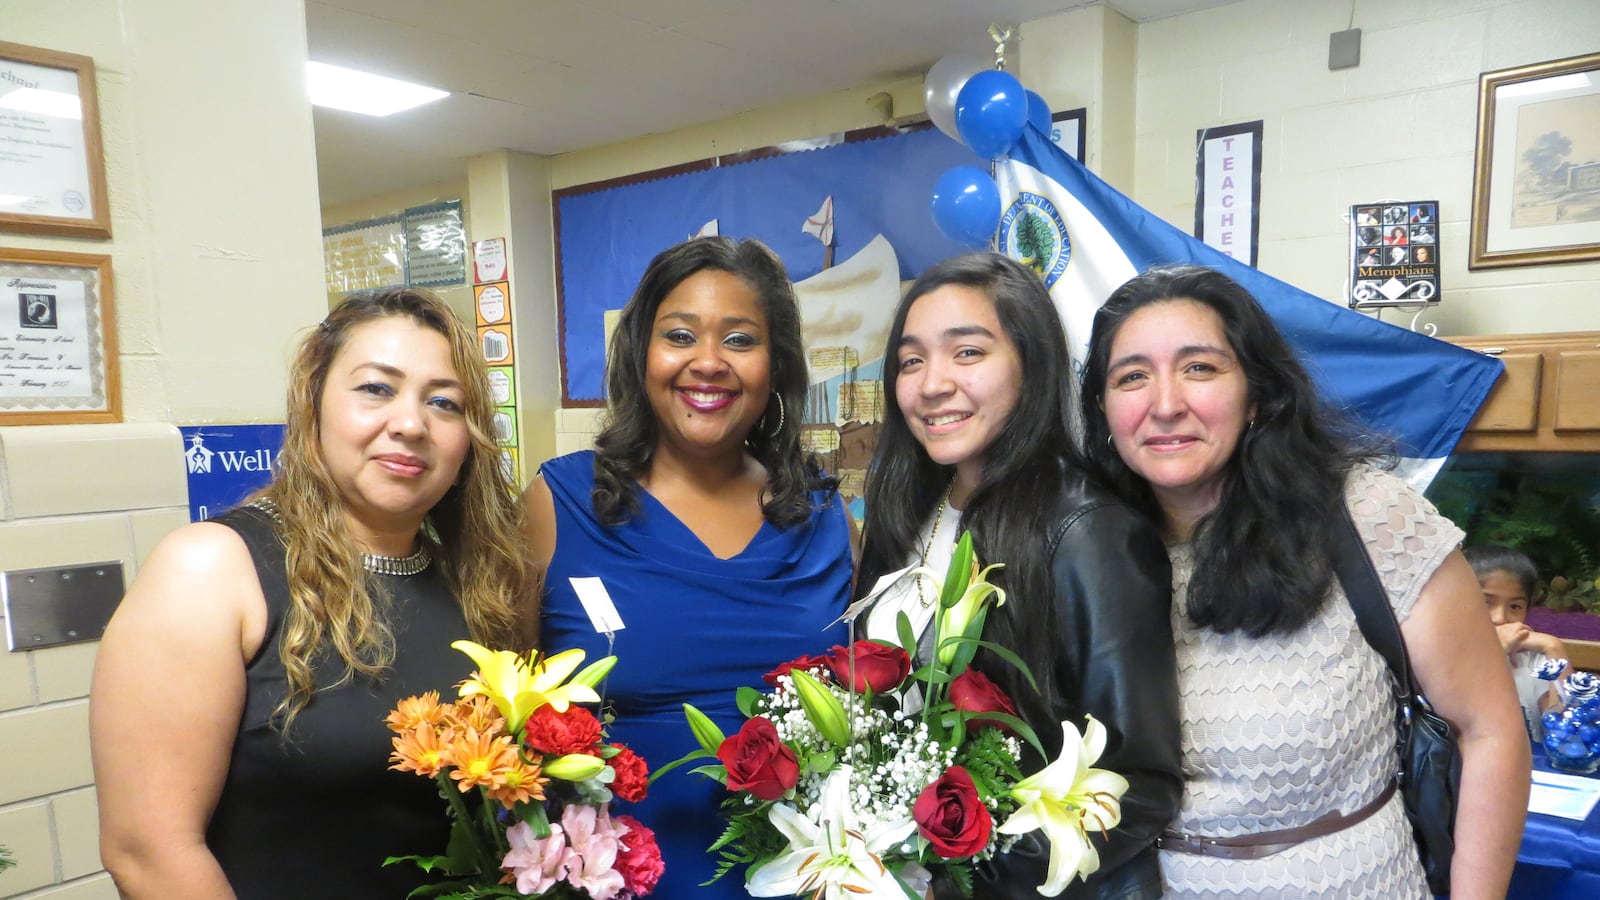 Principal Yolanda Heidelberg with former student Maria Pena (third from left) and family members.